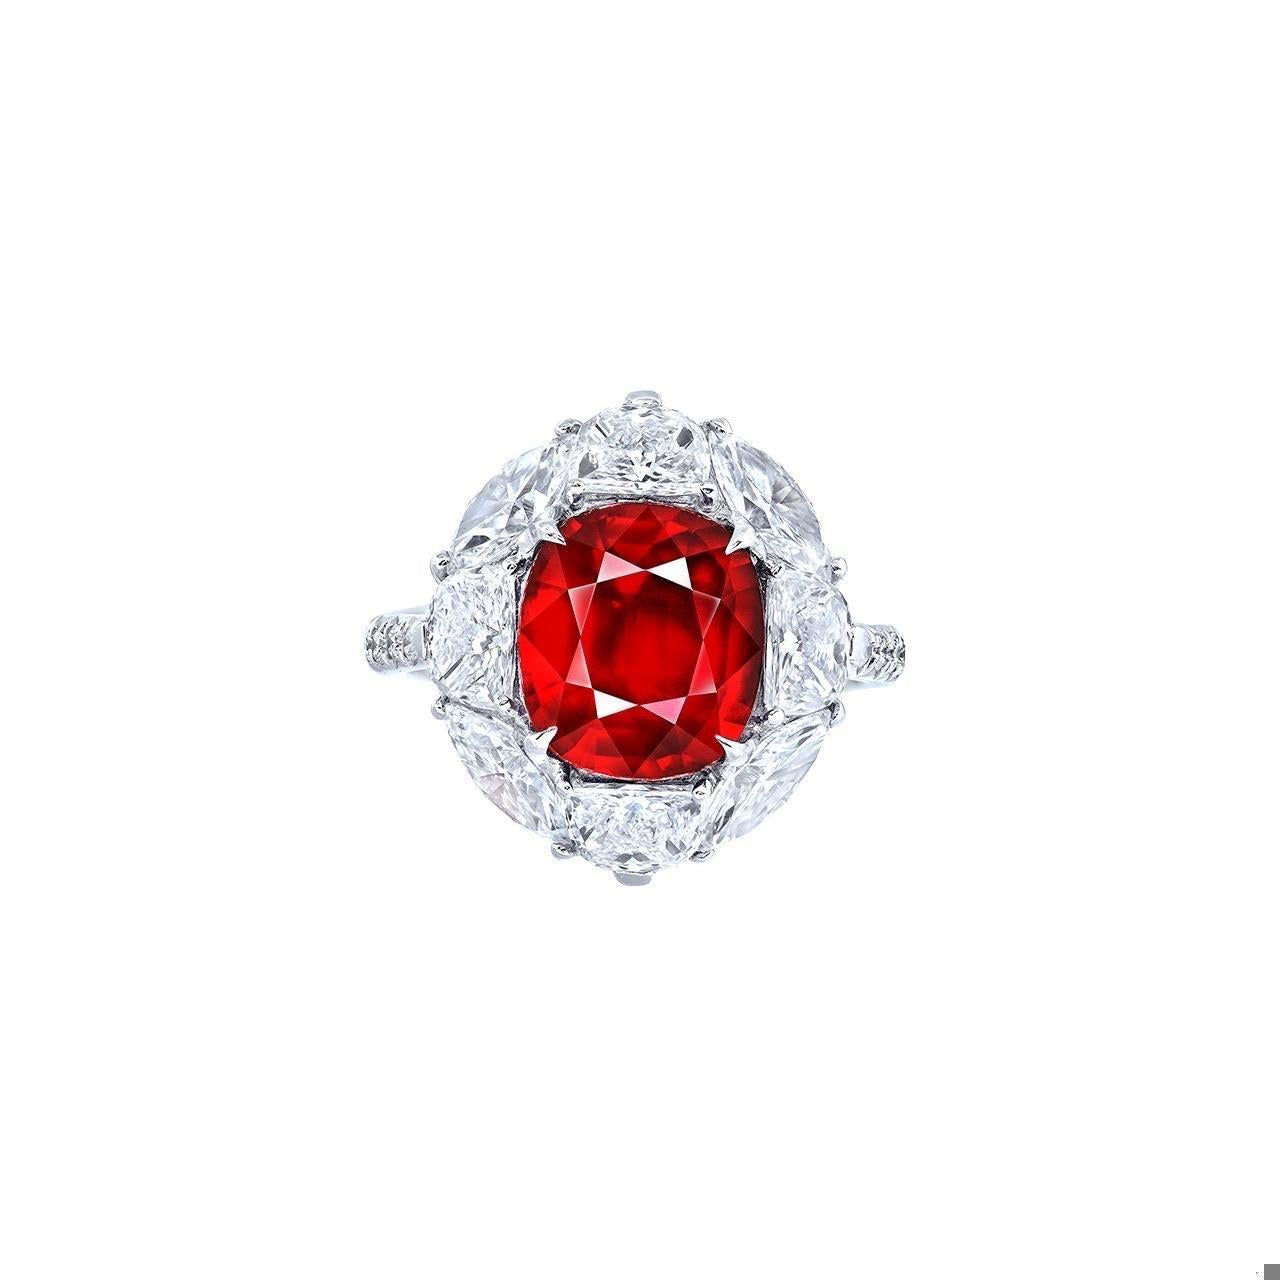 Emilio Jewelry Certified 5 Carat No Heat Vivid Red Ruby Ring